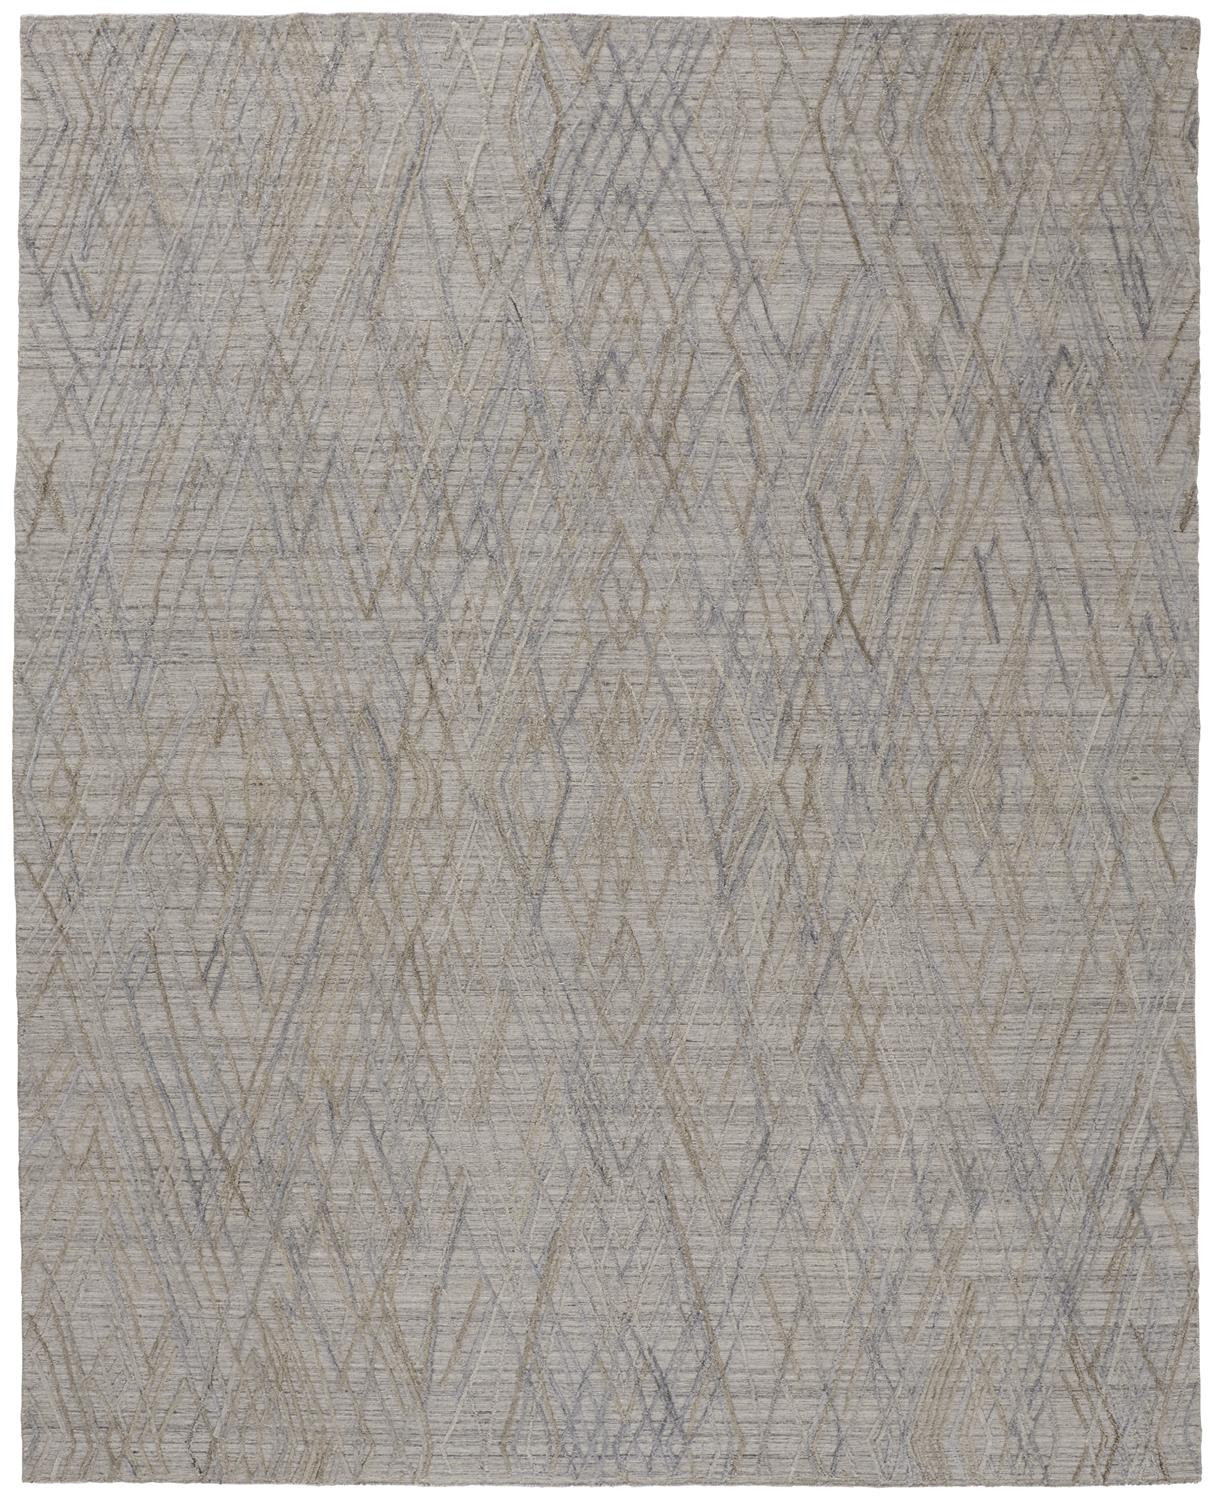 5' X 8' Gray And Blue Abstract Hand Woven Area Rug-513545-1